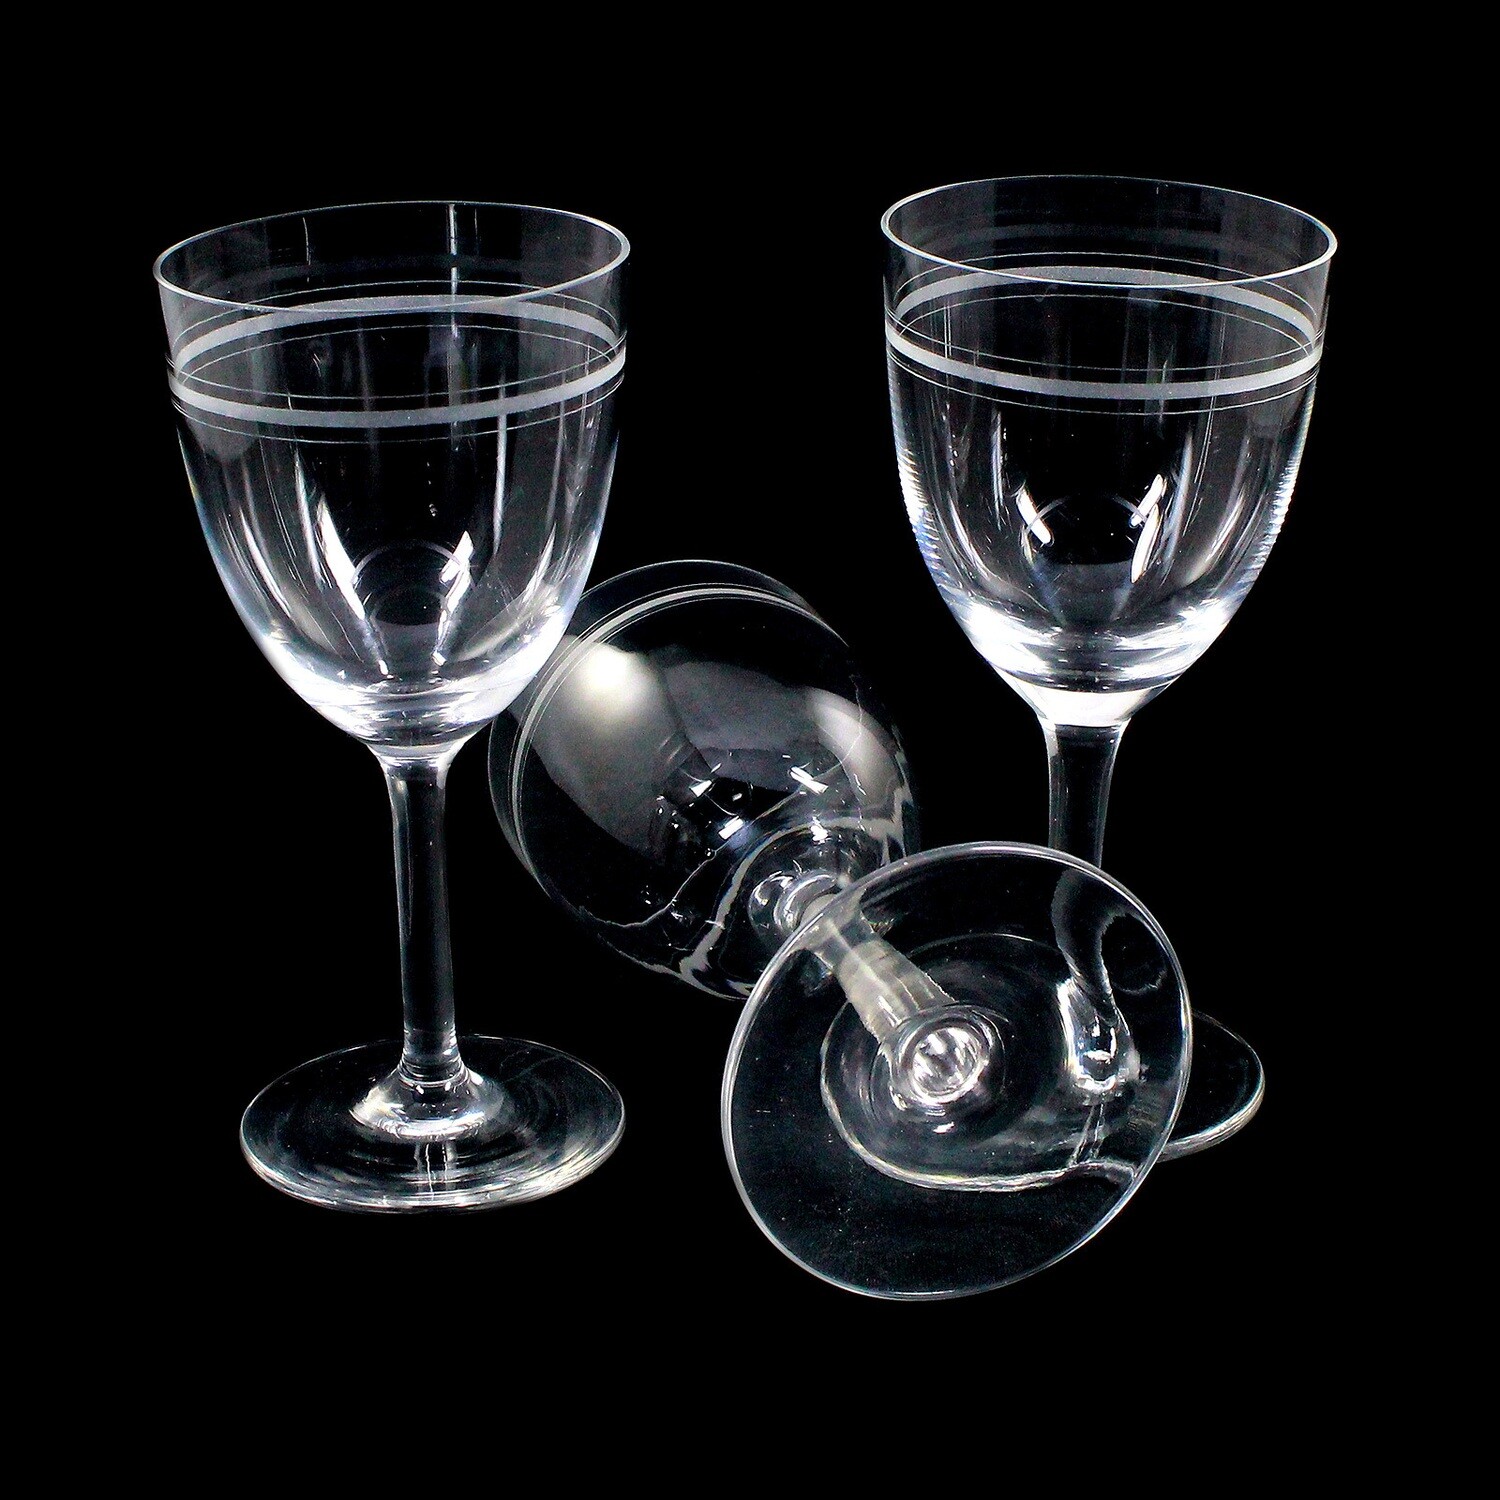 3 stem glasses made of colorless glass with etched decorative band, around 1900-10